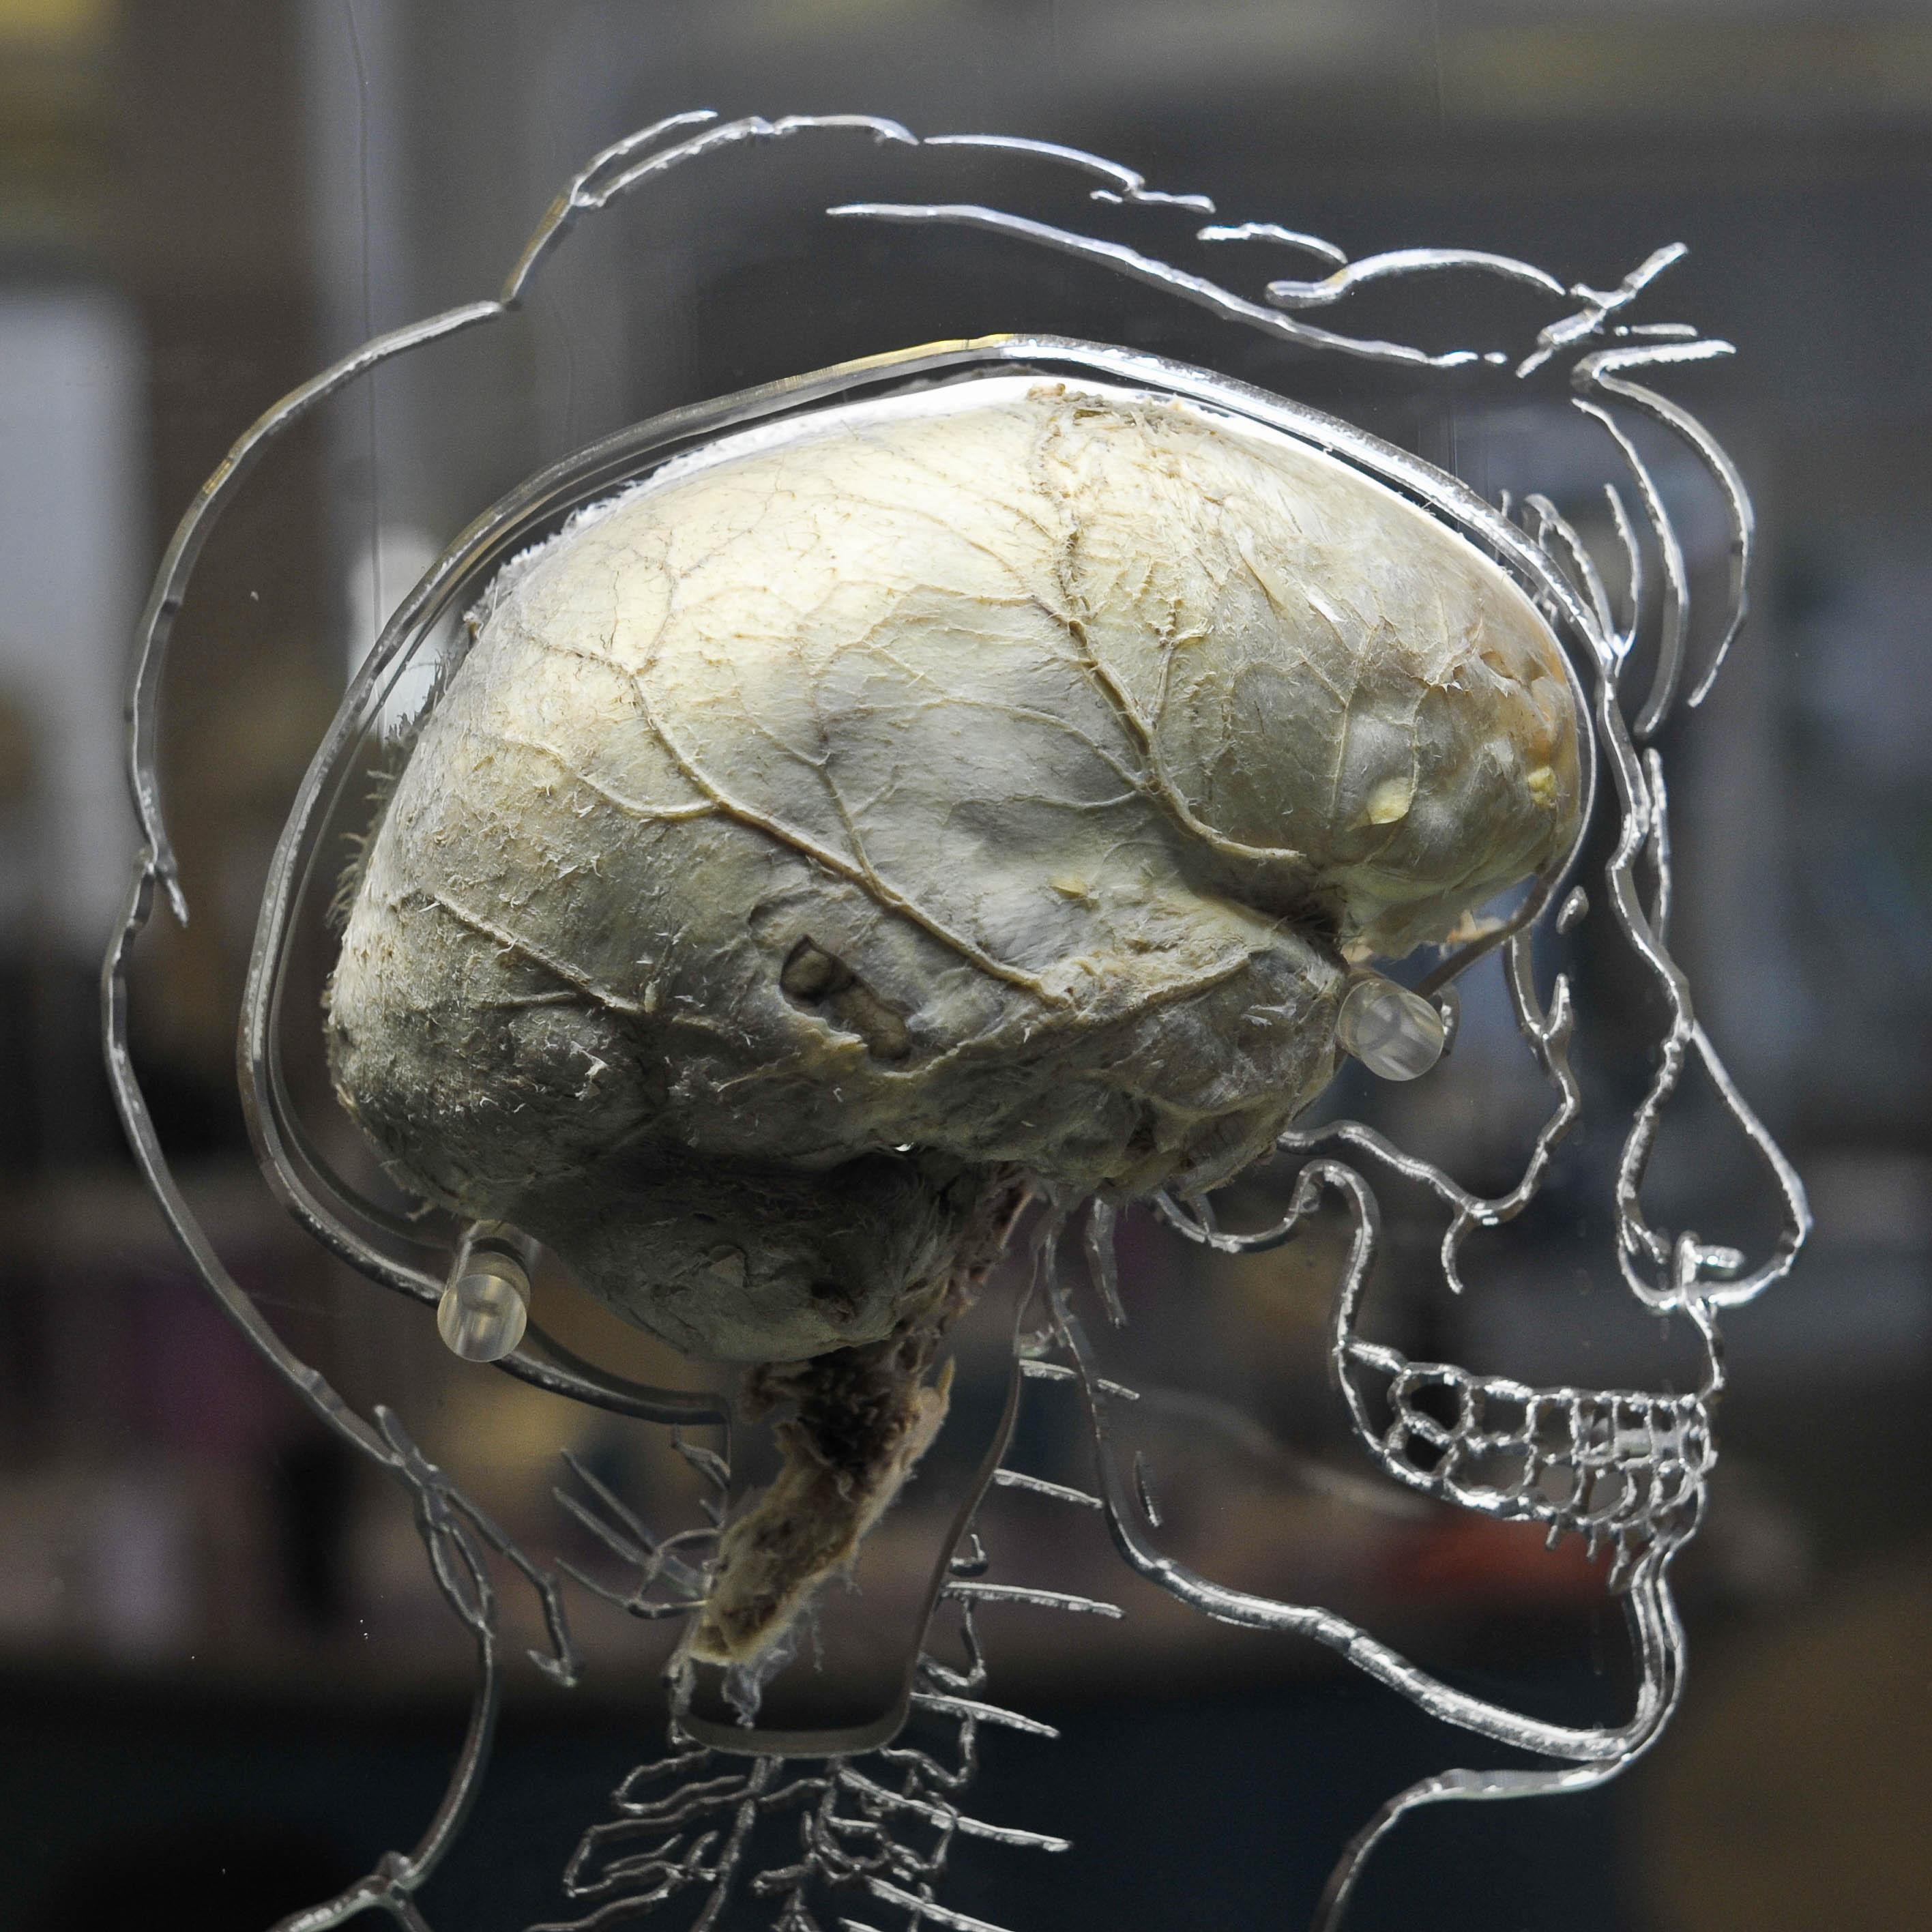 Brain stimulation improves memory for at least one month, study suggests (Ben Birchall/PA)